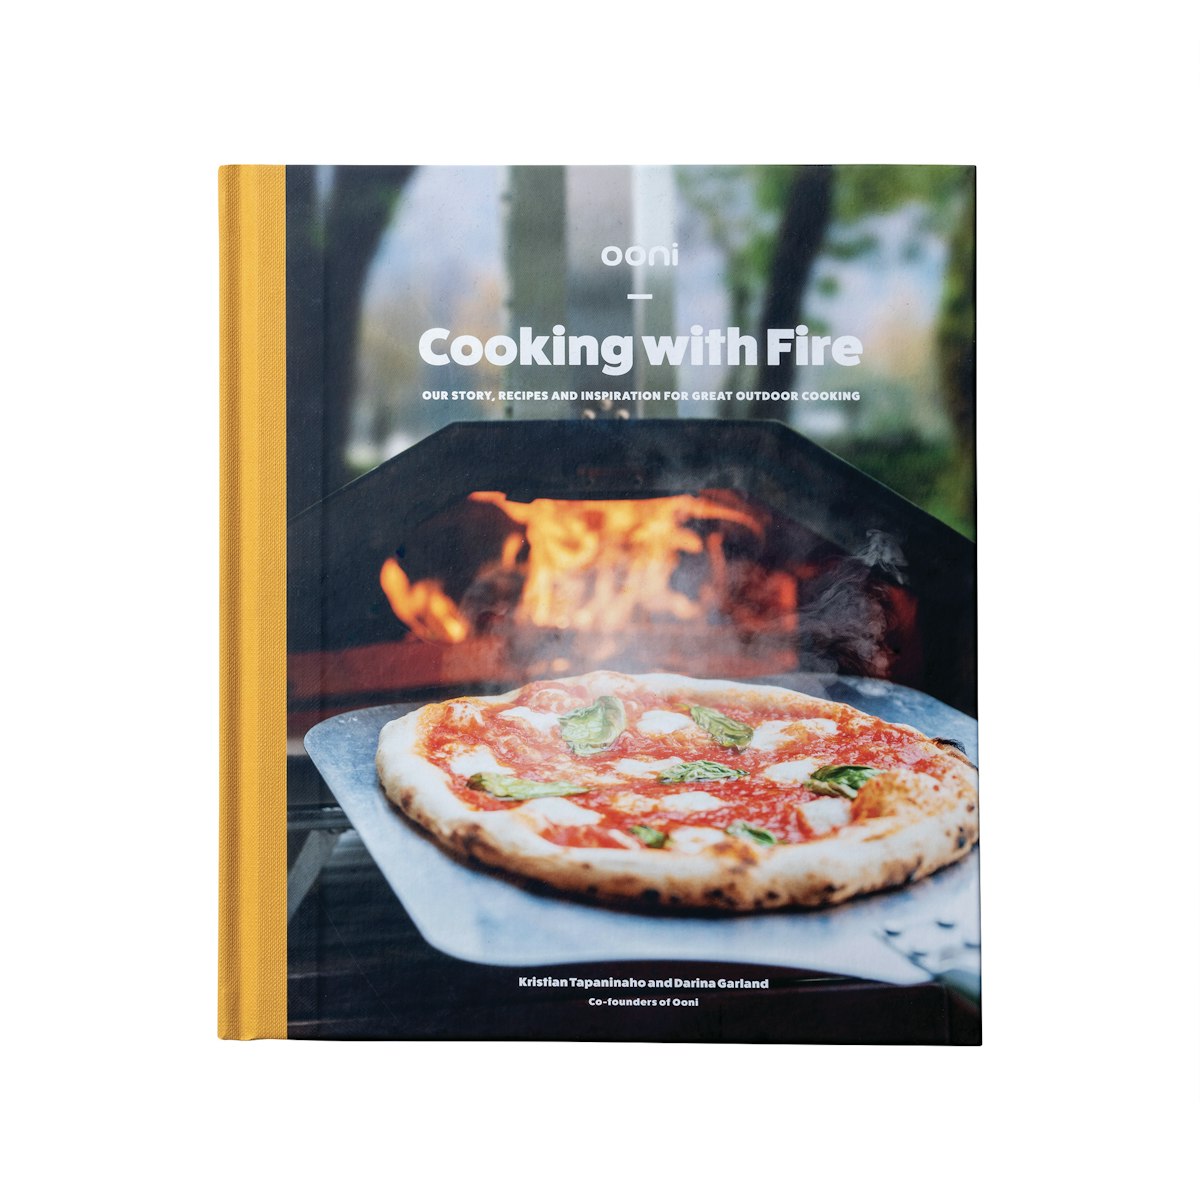 Ooni Pizza-Kochbuch „Cooking with Fire“ von Ooni